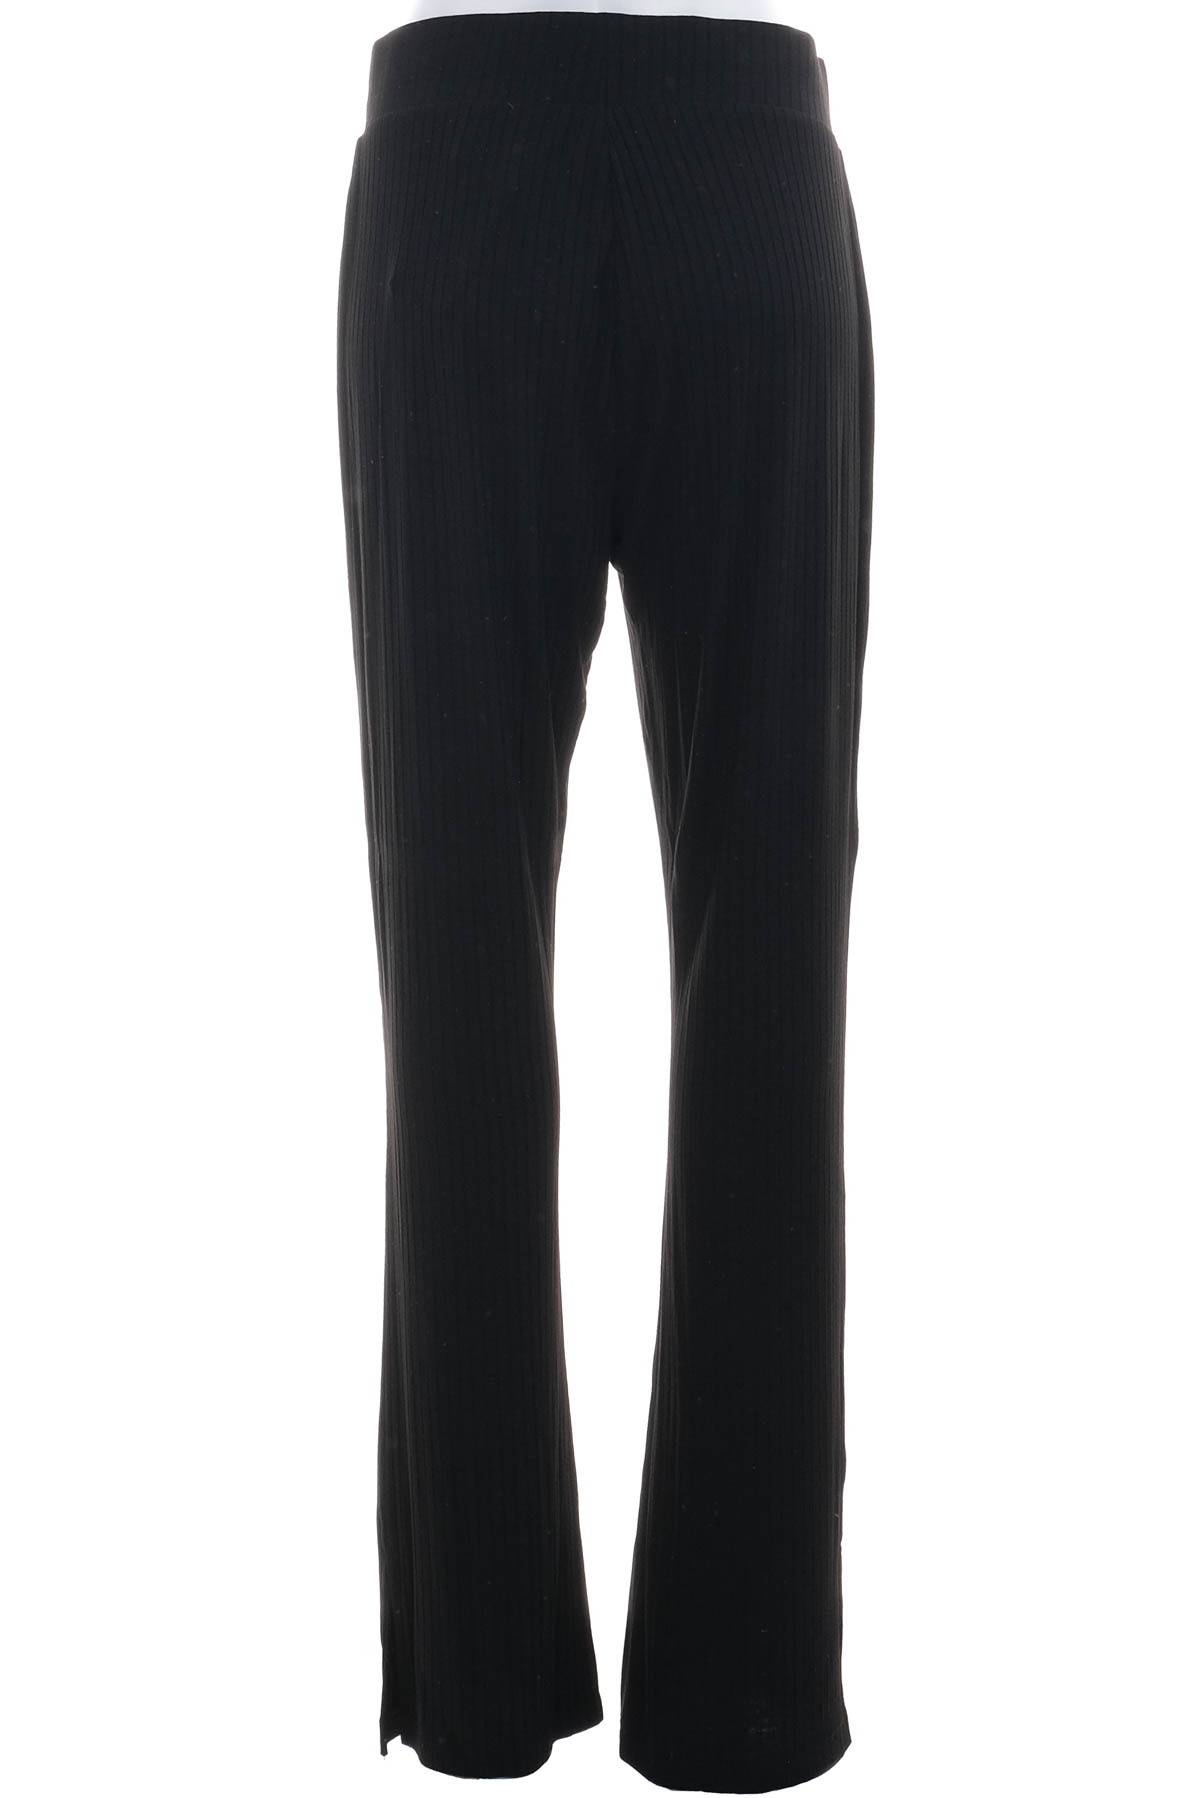 Women's trousers - TESSENTIALS - 1